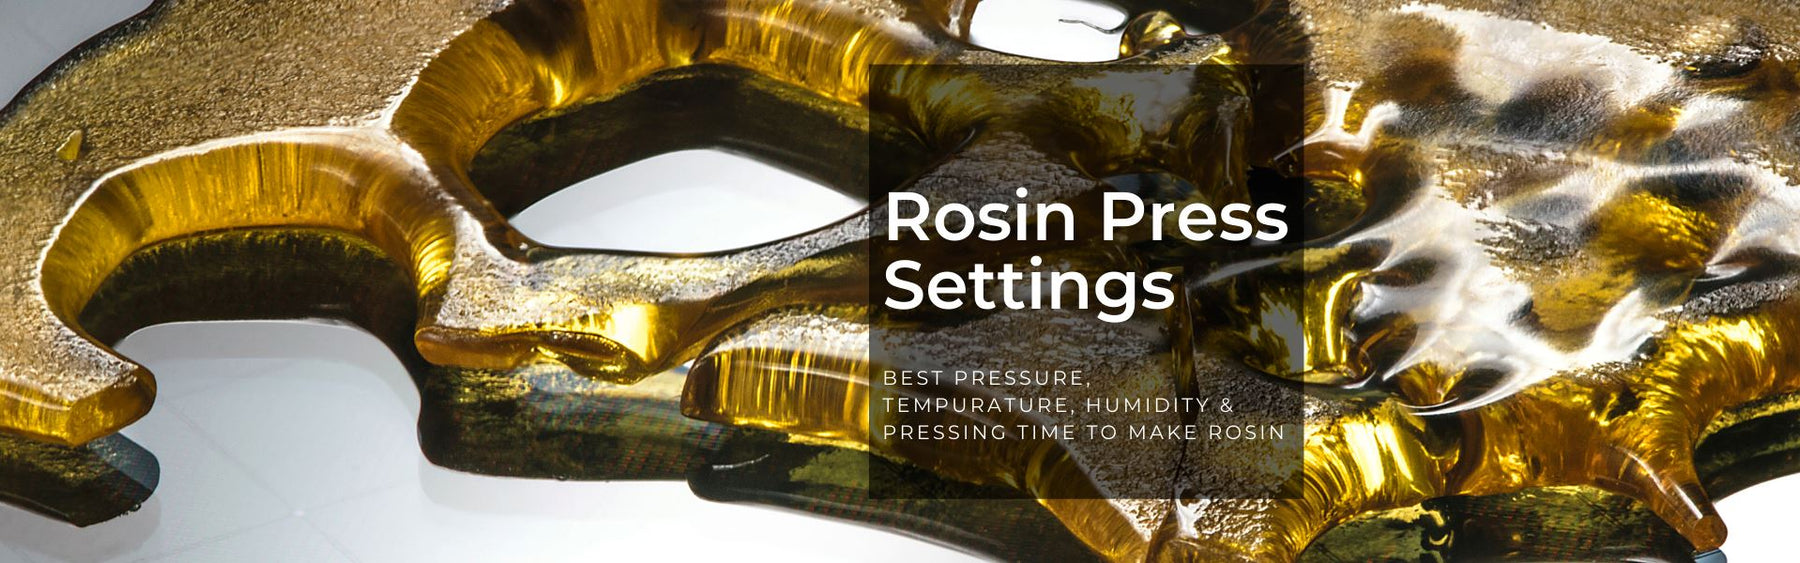 Best Pressure, Temperature, Humidity And Pressing Time To Make Rosin